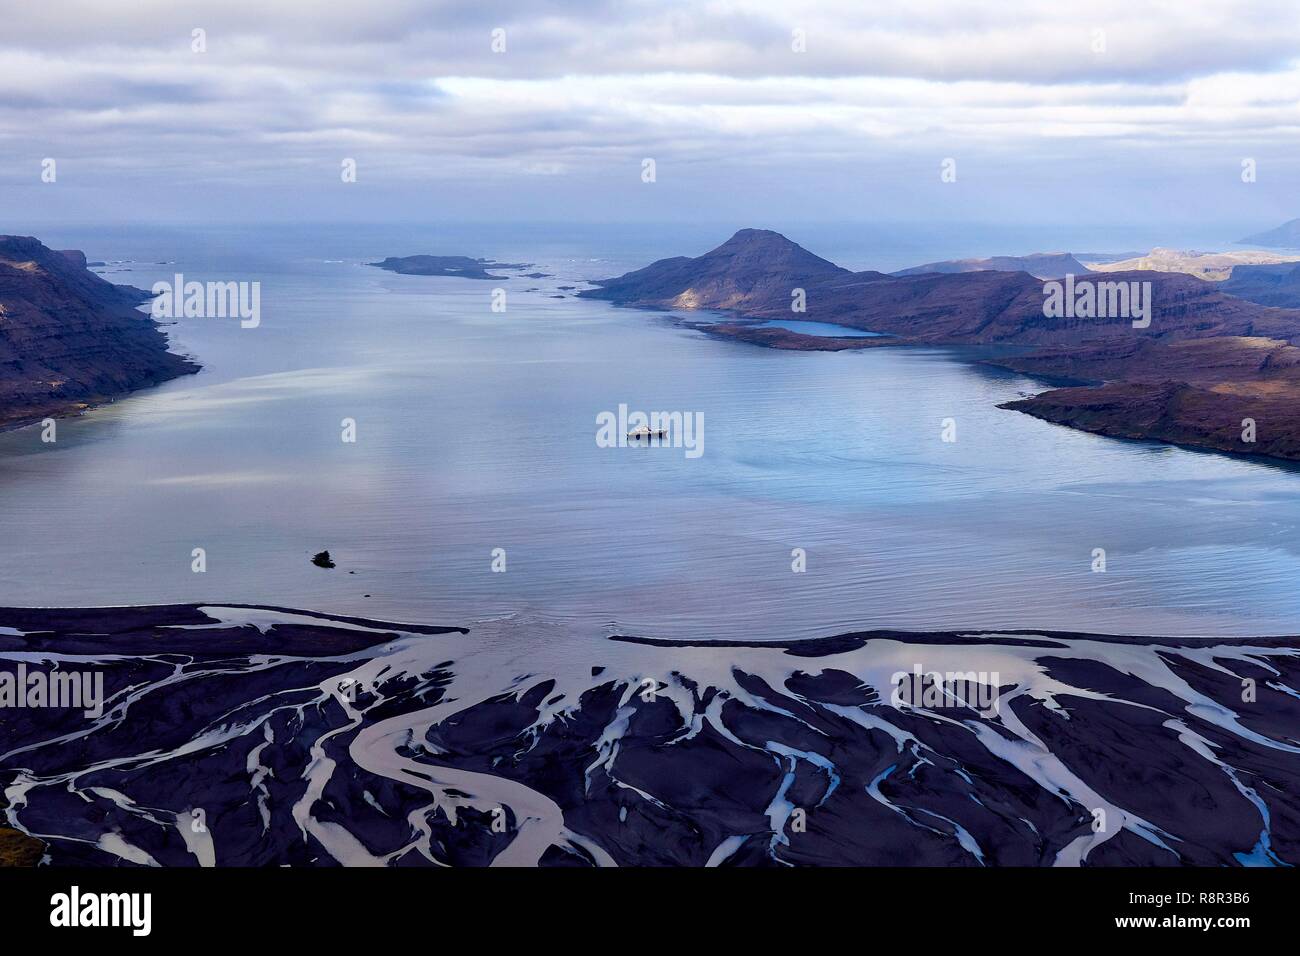 France, French Southern and Antarctic Territories (TAAF), Kerguelen Islands, Baie de la Table, the Marion Dufresne (supply ship of French Southern and Antarctic Territories) at anchor for supplying huts by helicopter, in the foreground the meanders of the plain Ampère (marine outwash plain of glacier Ampere (aerial view) Stock Photo